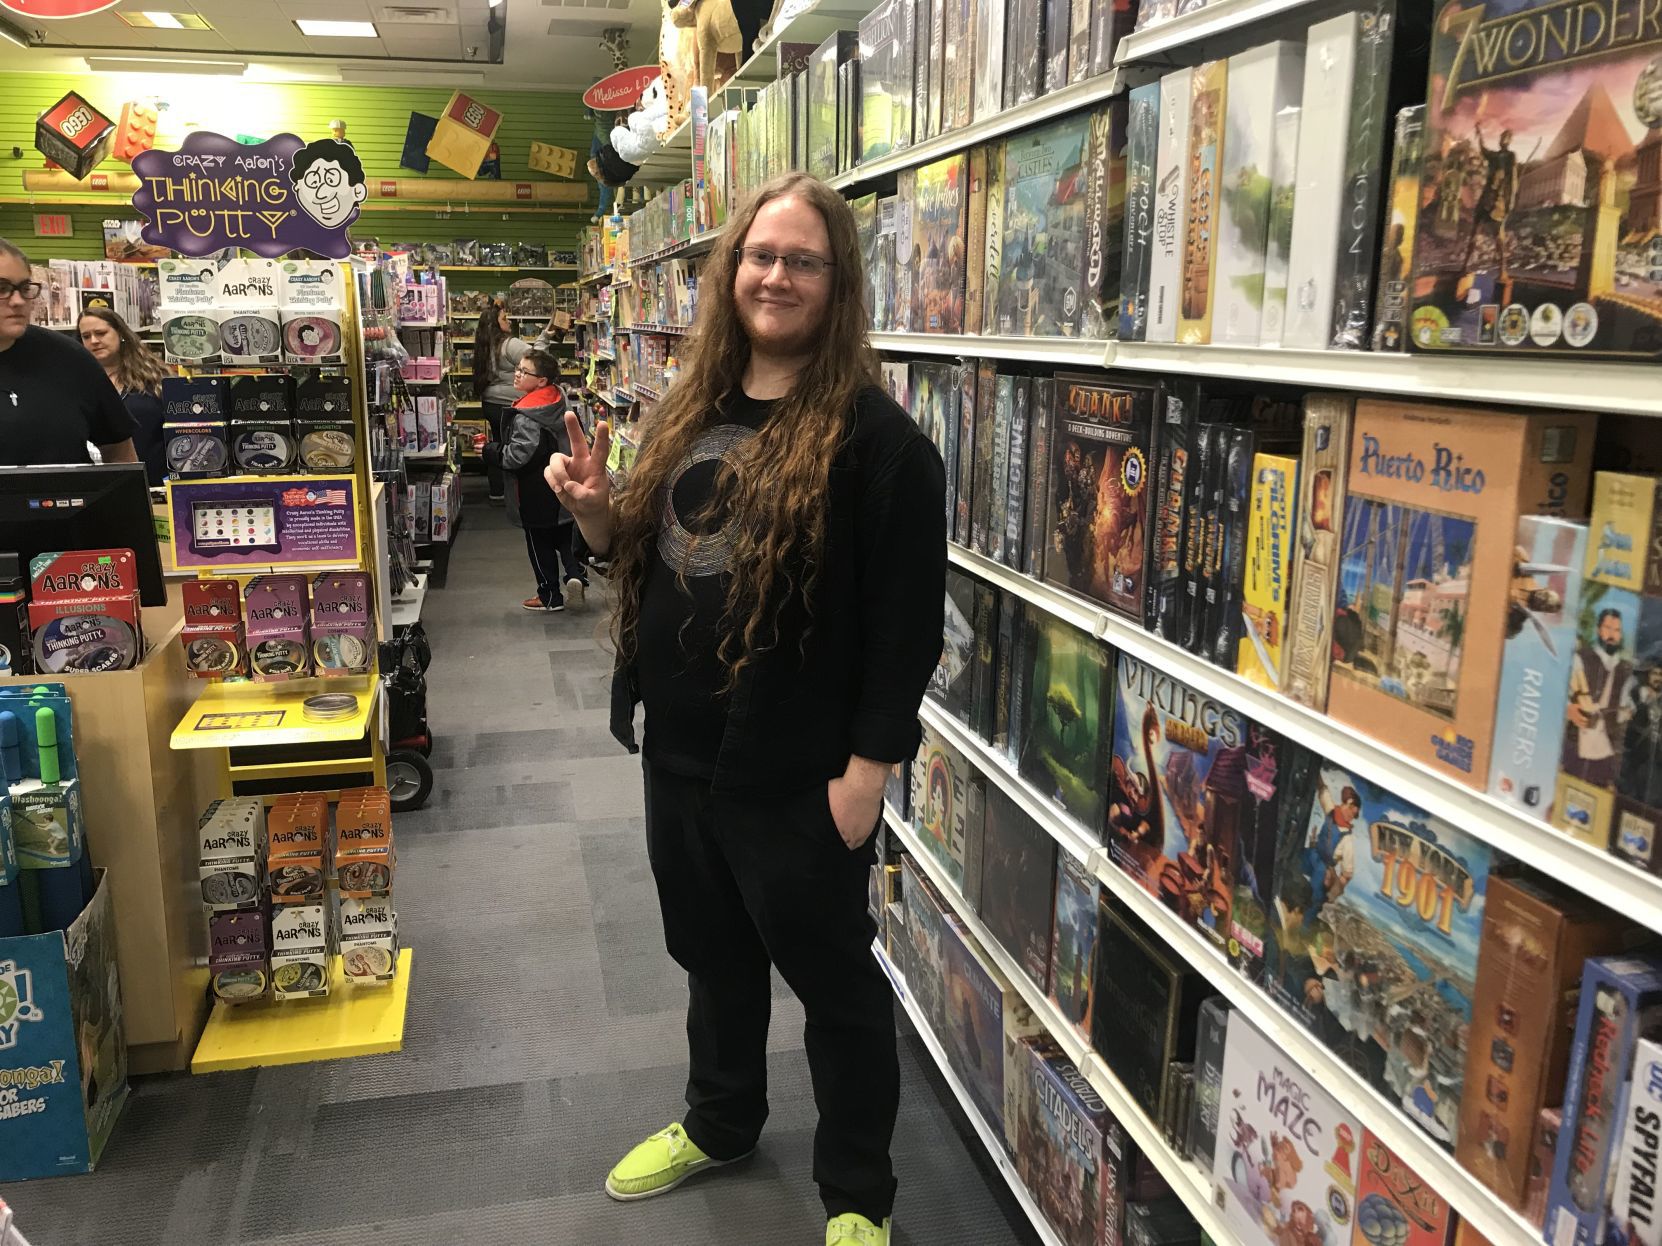 toys and games store